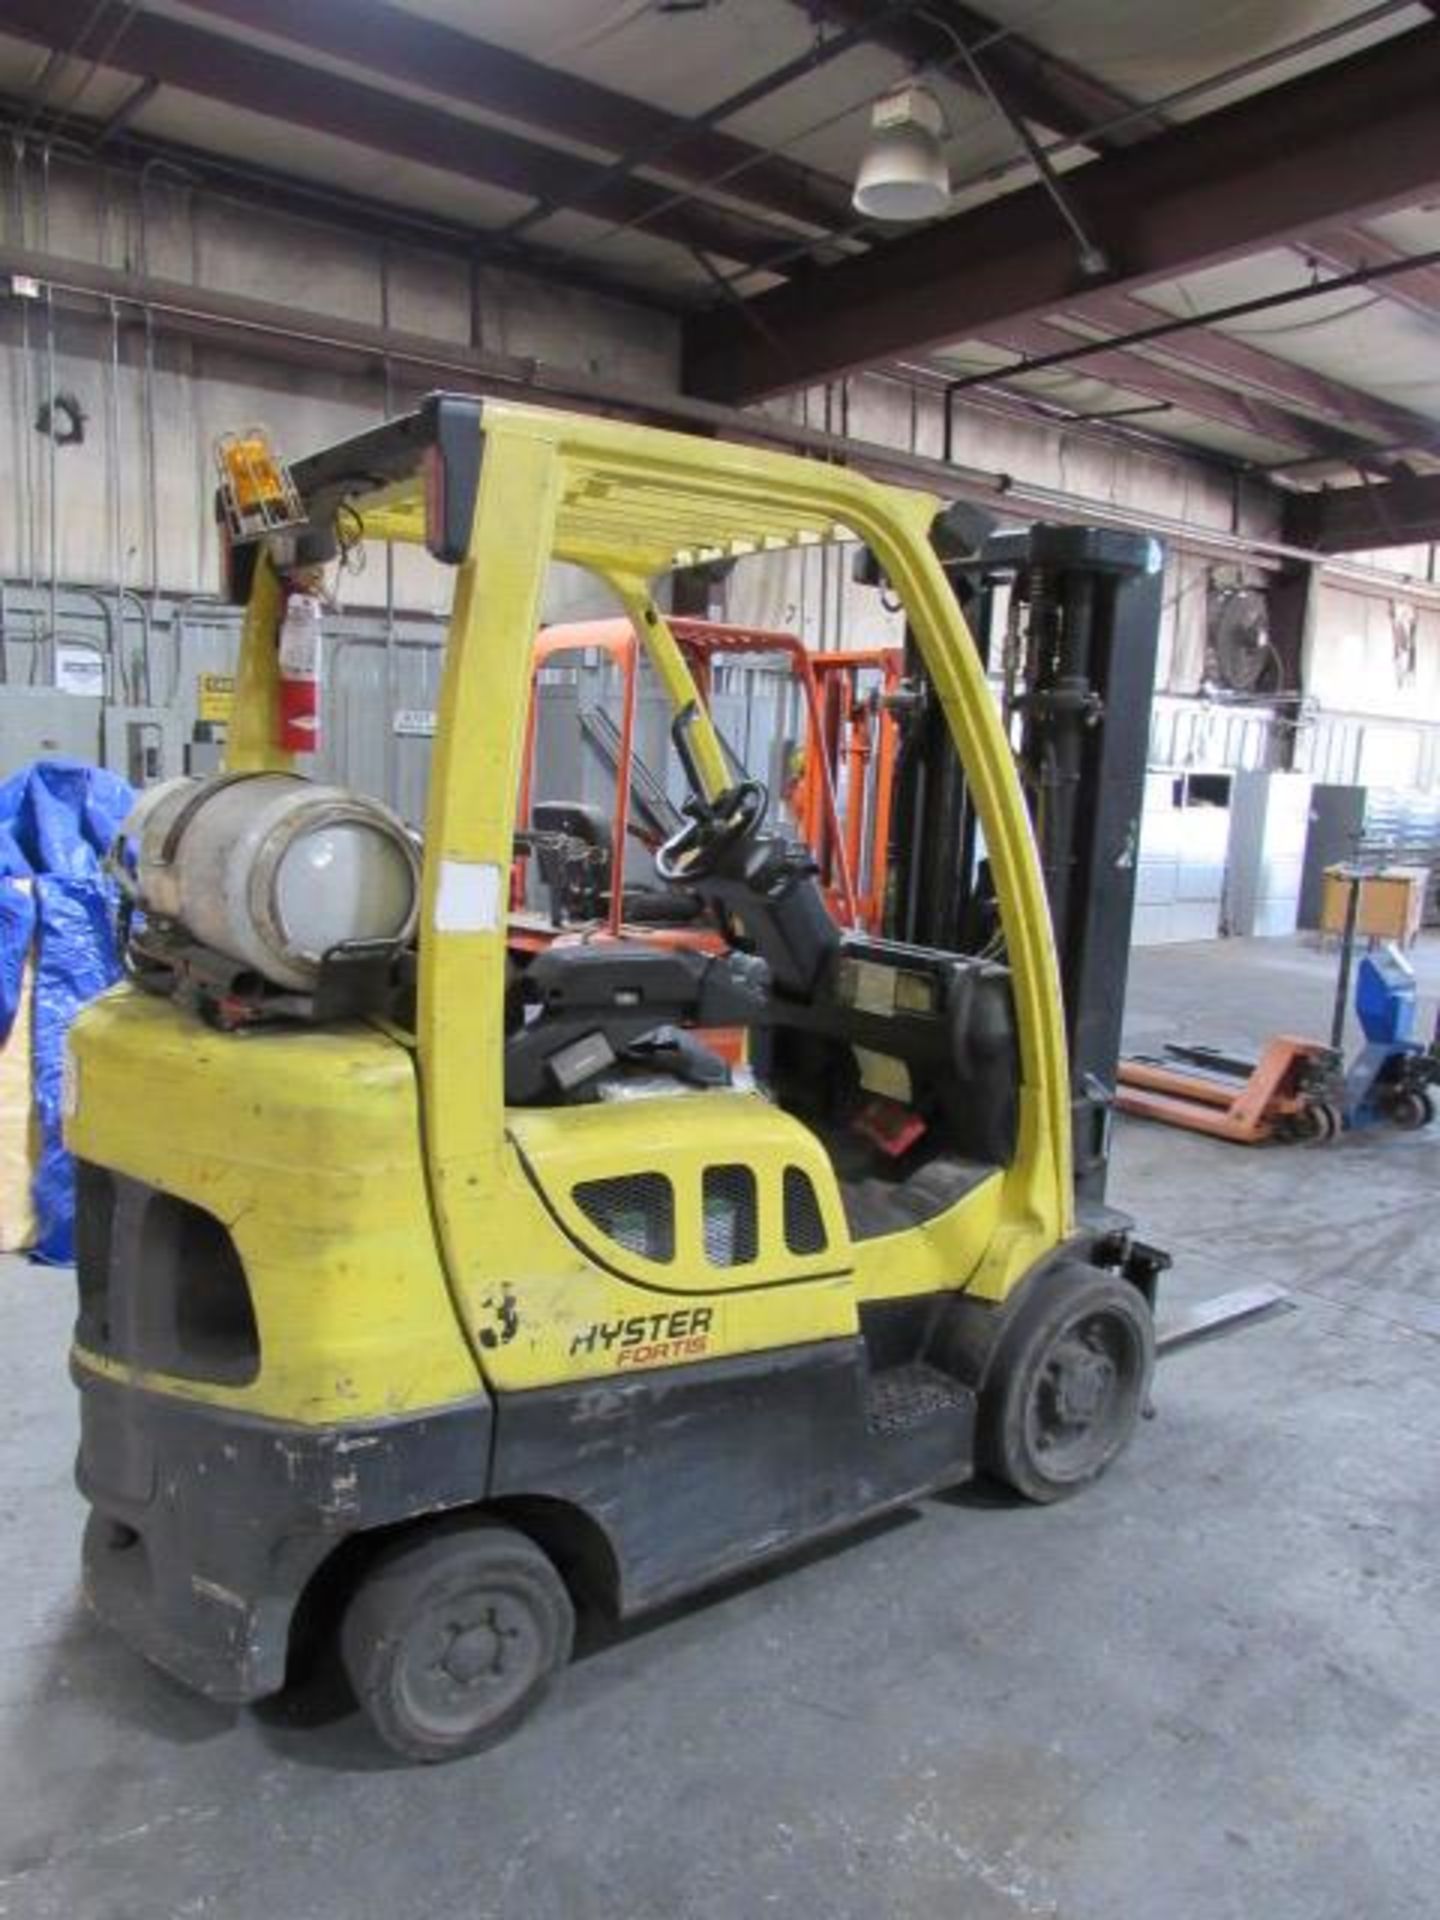 Hyster Model F50 5,000lb Capacity LP Gas Forklift - Image 3 of 8